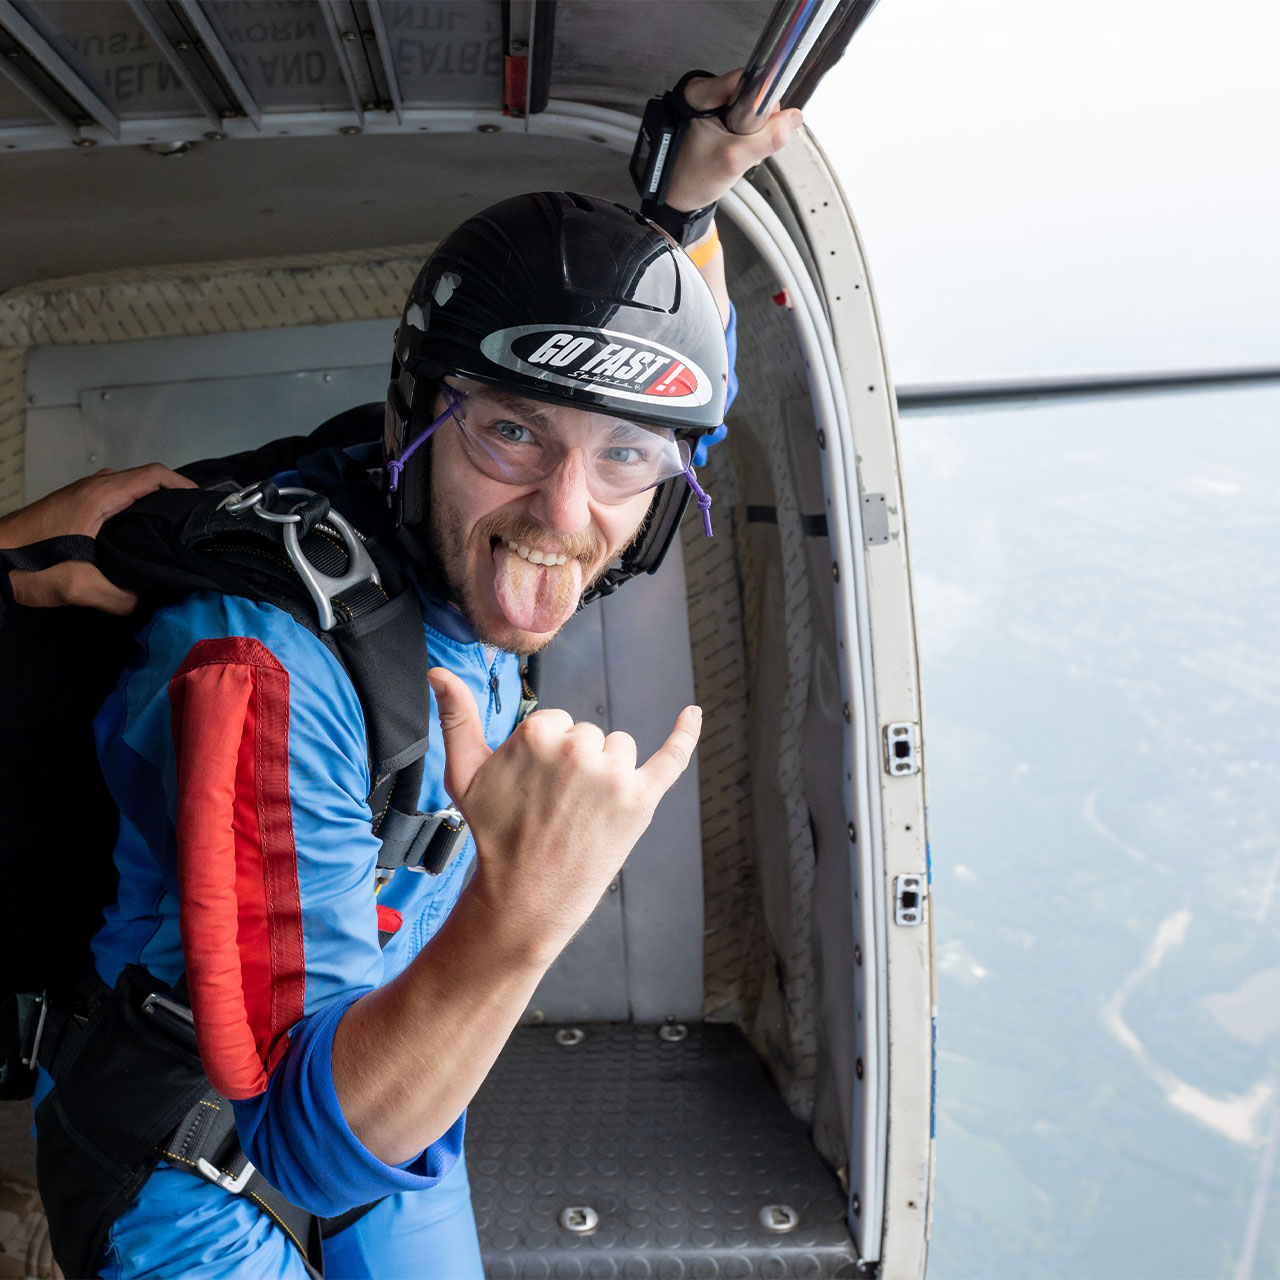 A learn to skydive AFF Student sporting a helmet with a sticker that says "Go Fast" gives the hang-loose hand signal as he prepares to exit the aircraft